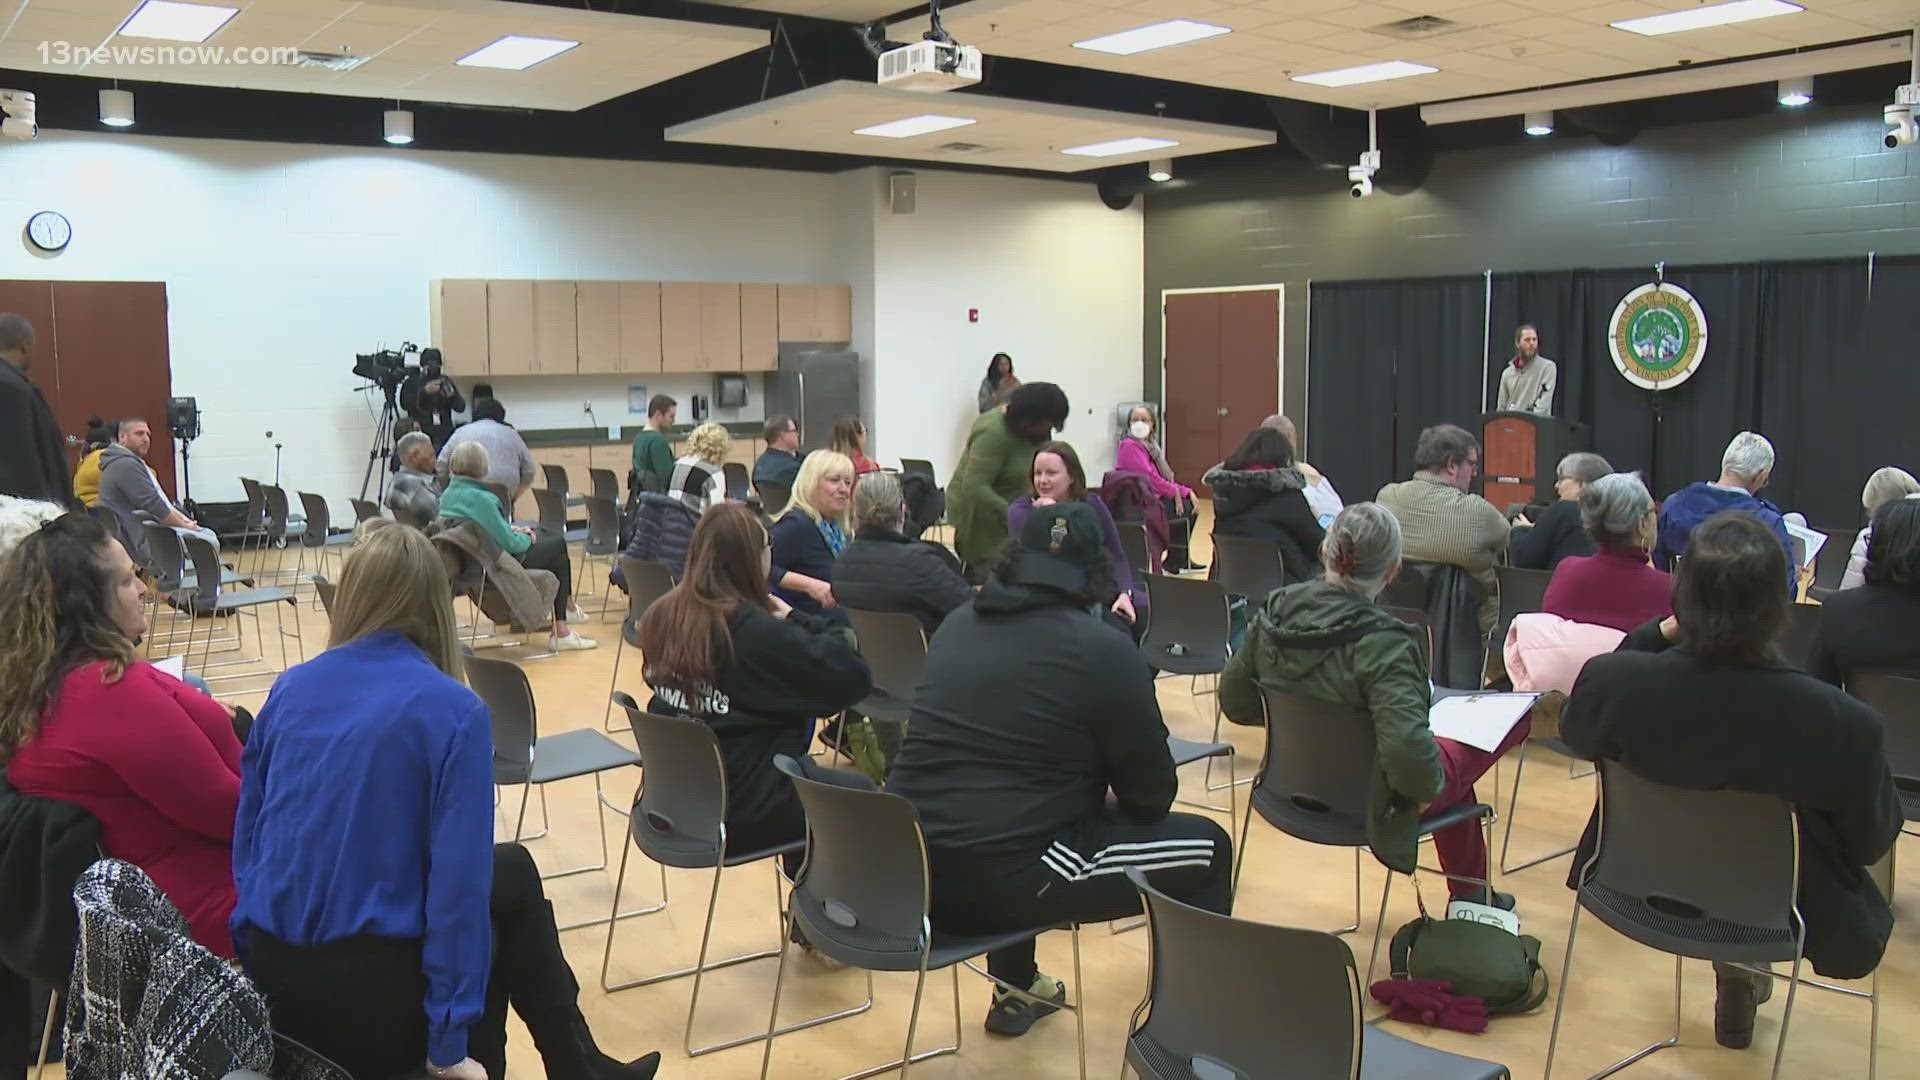 Thursday night, people in Newport News came together to share thoughts and concerns with Mayor Phillip Jones. At the heart of the conversation, was Richneck.